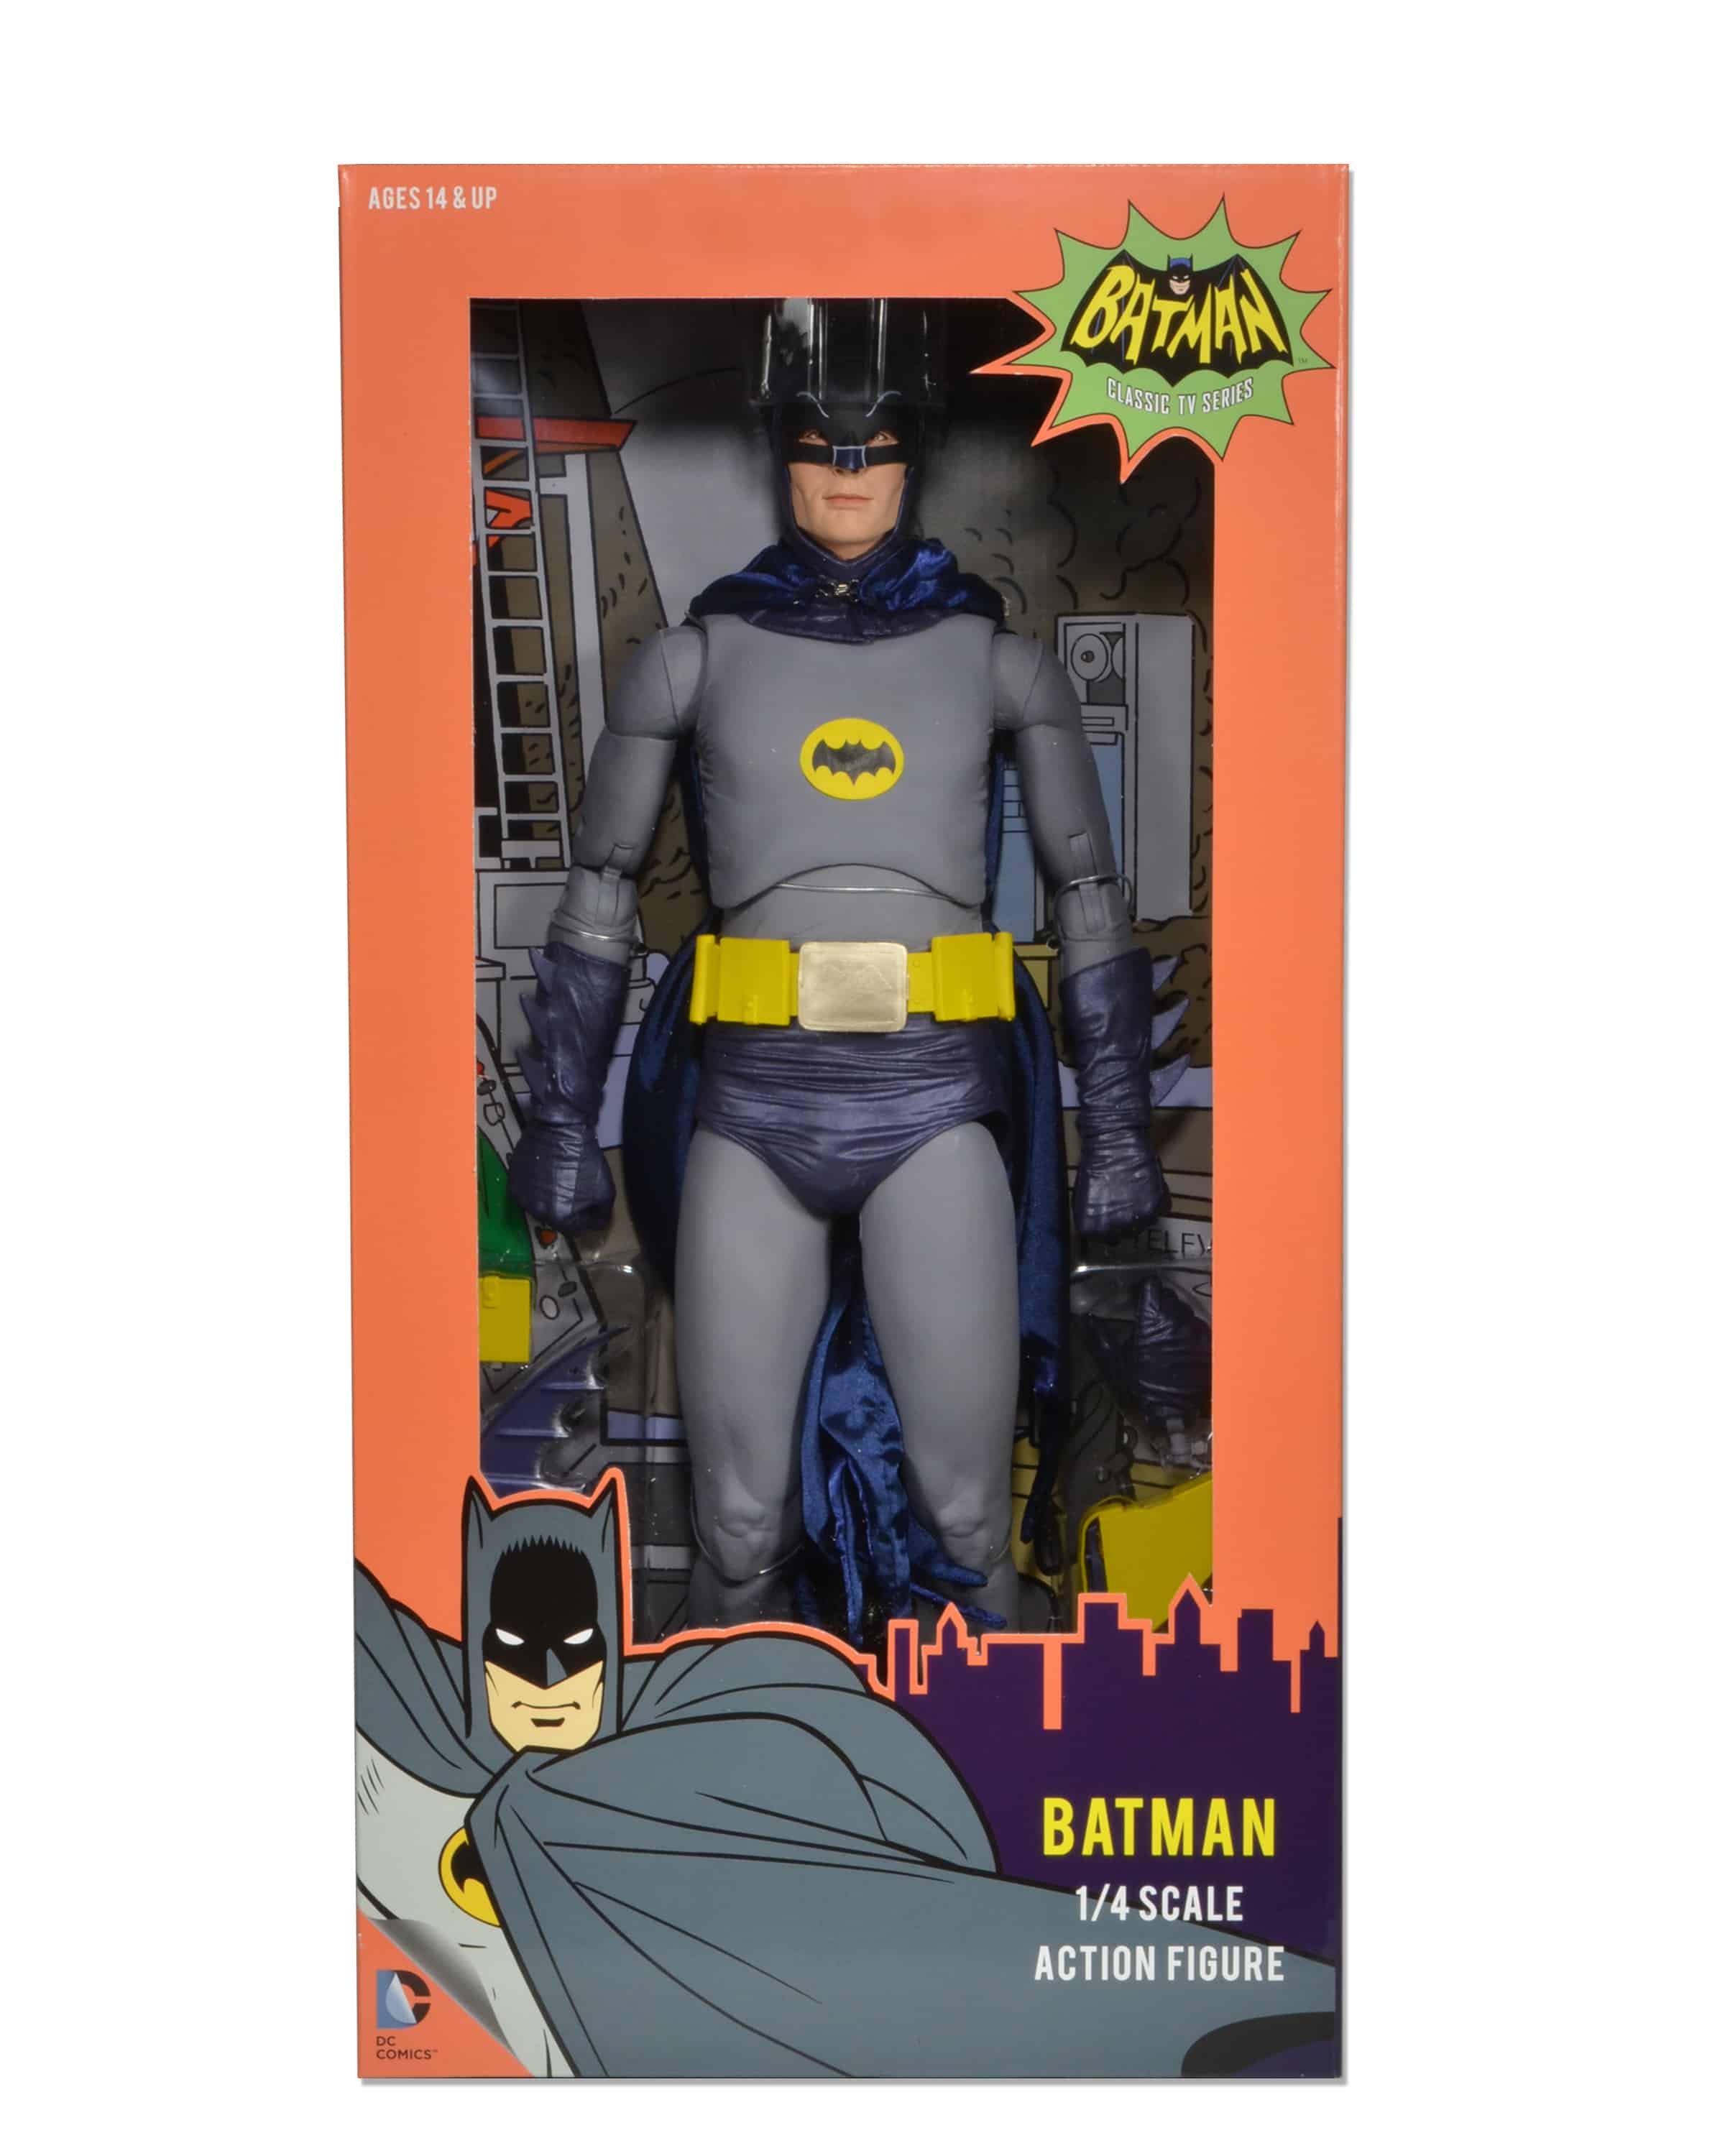 The NECA Vault reopens with limited edition Horror and Batman figures to close out 2022 23